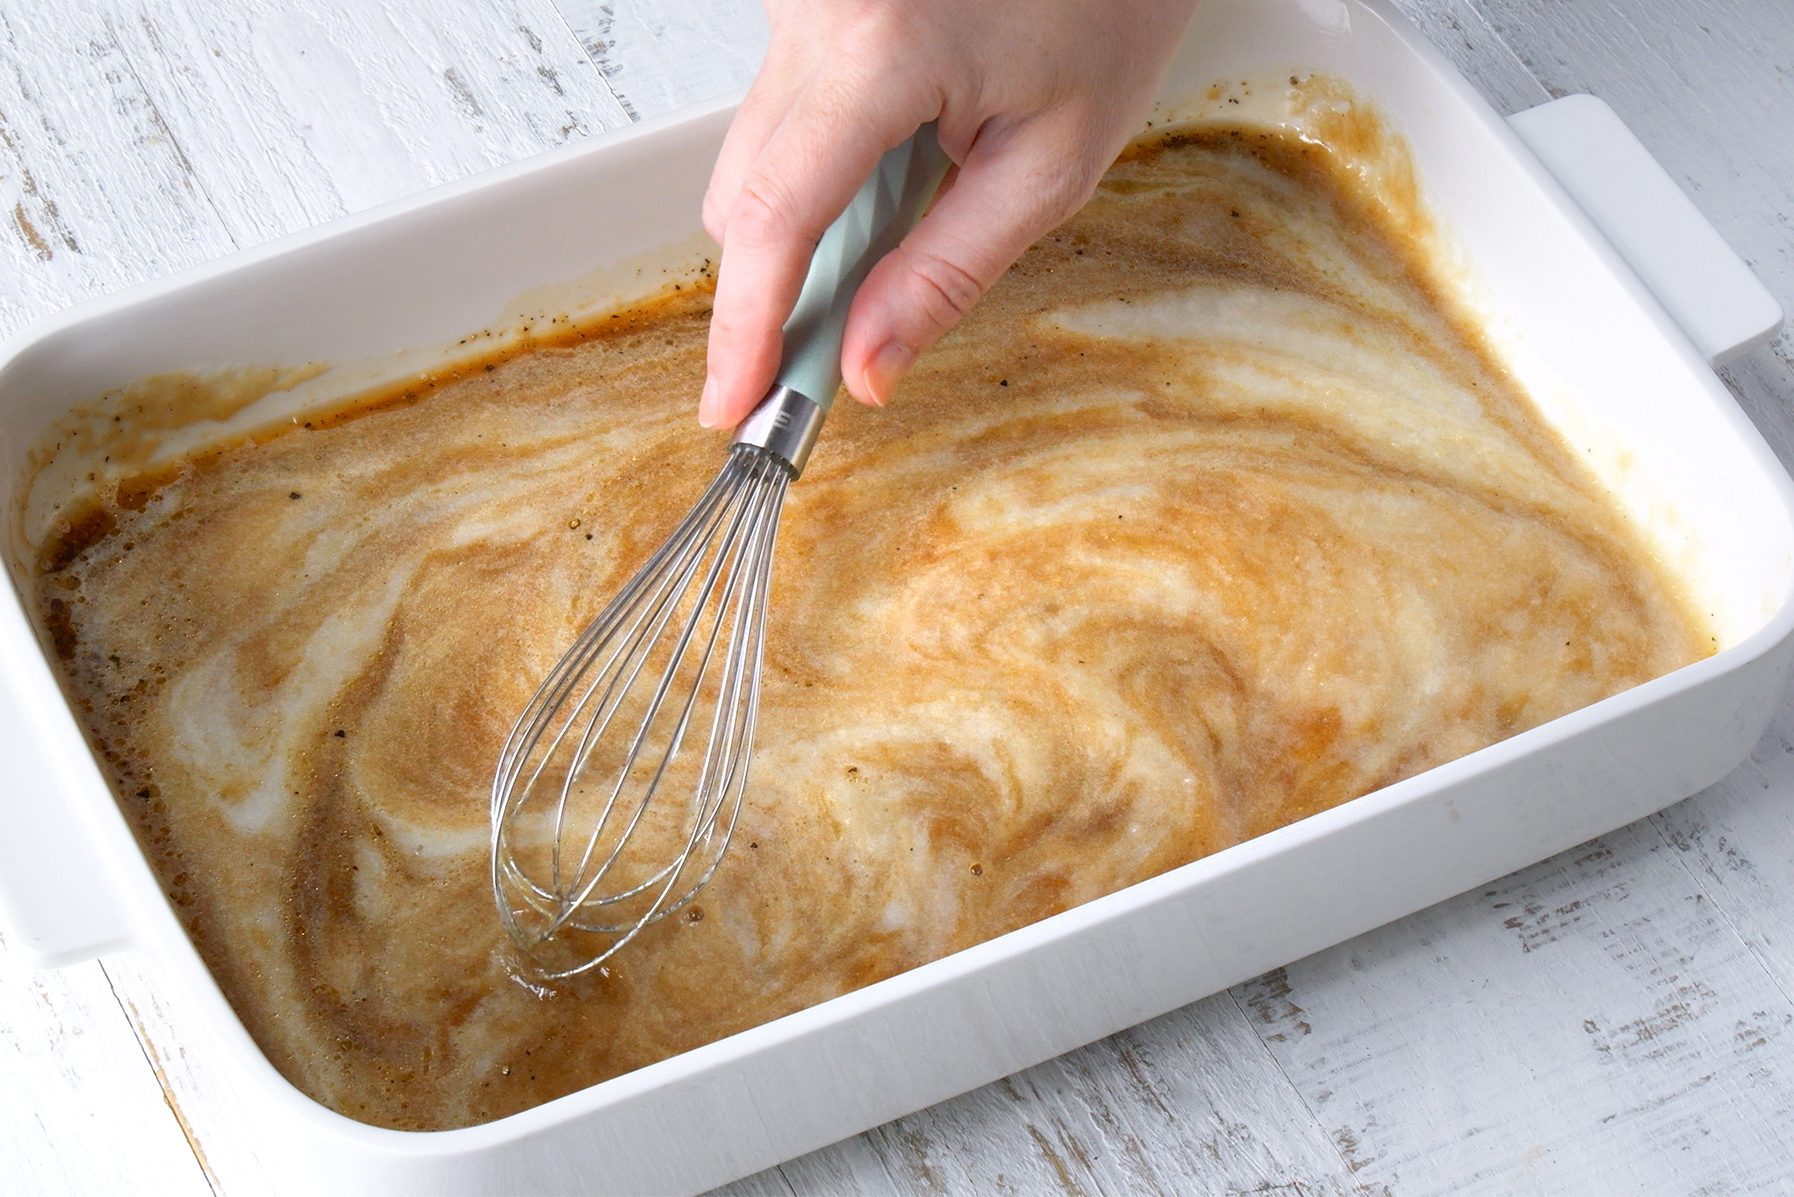 A hand using a whisk to stir a creamy, light brown mixture in a white rectangular baking dish placed on a distressed white wooden surface. 